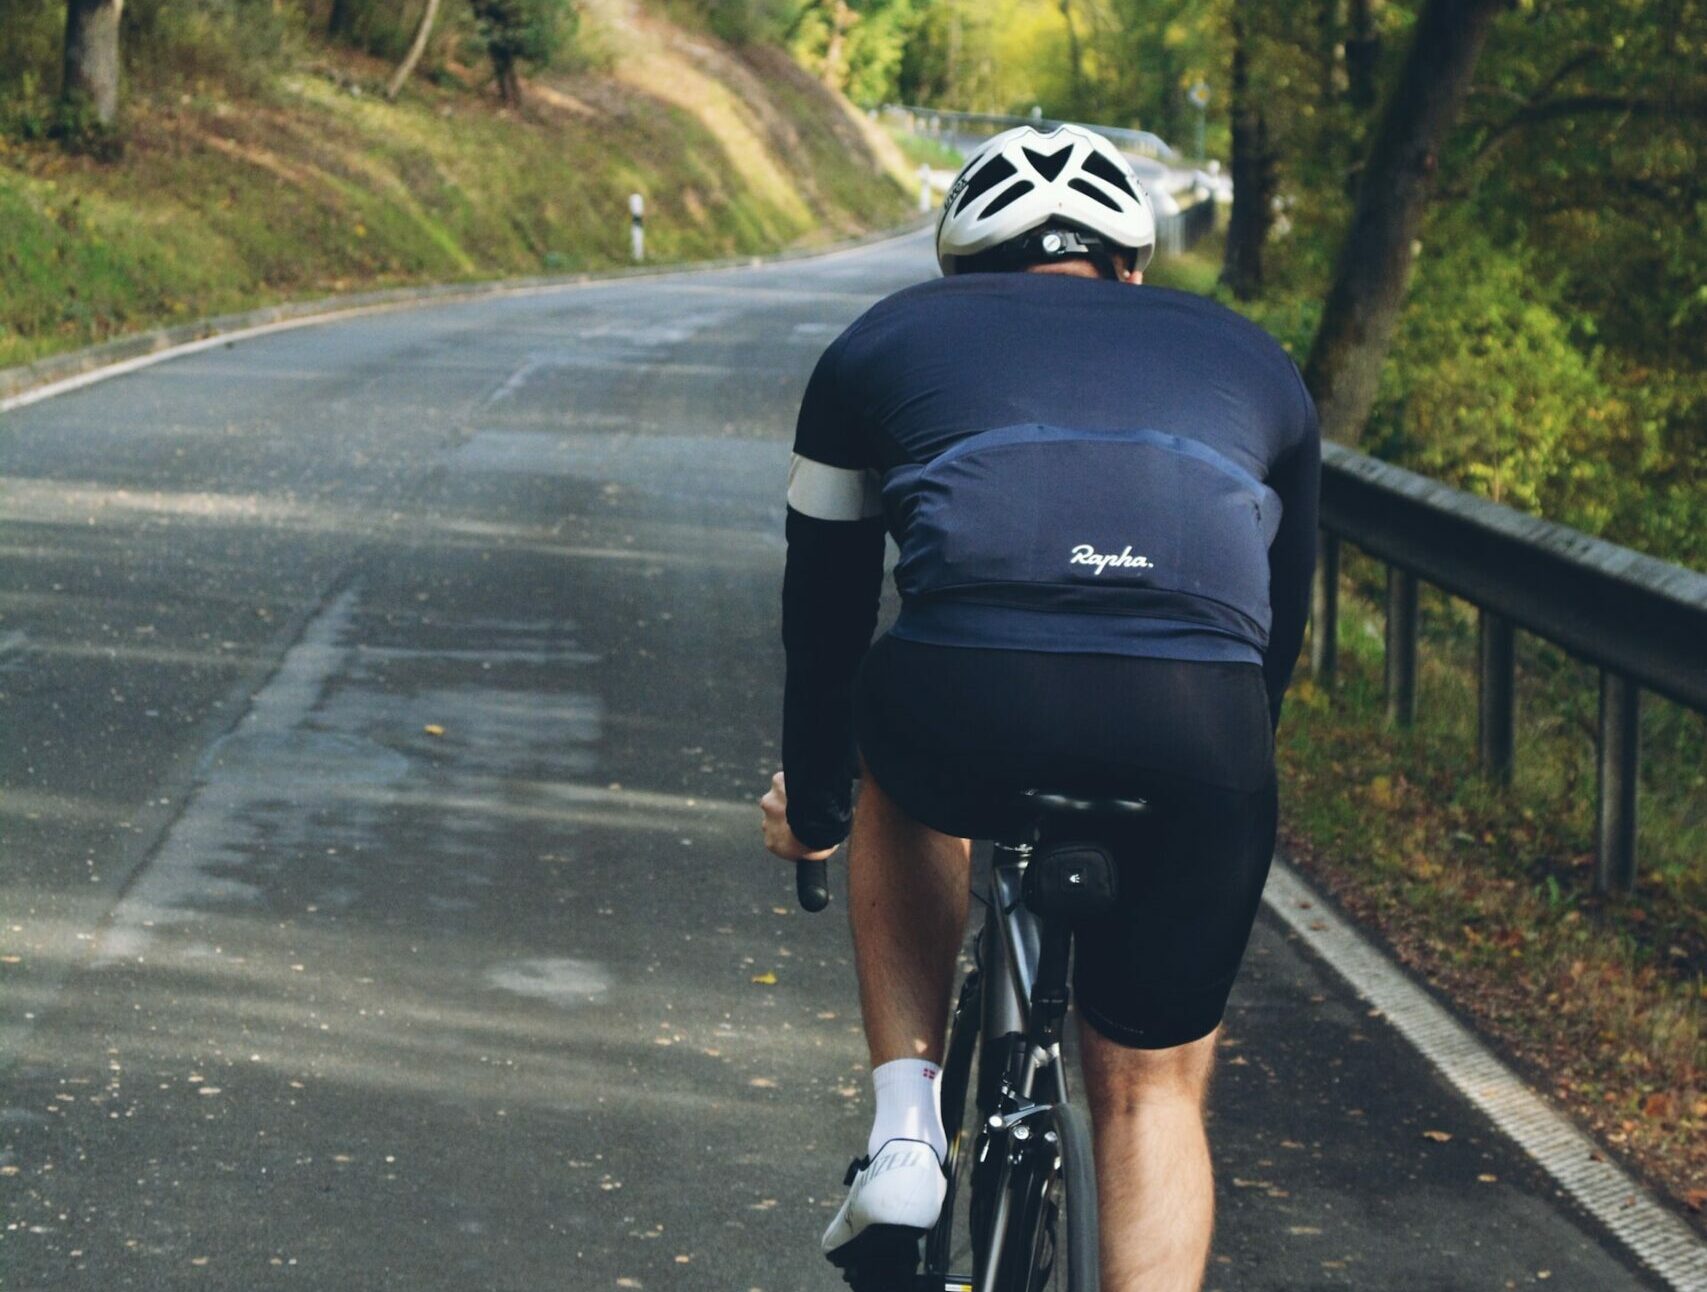 6 Fundamental Safety Tips For Cyclists To Avoid Accidents On The Road